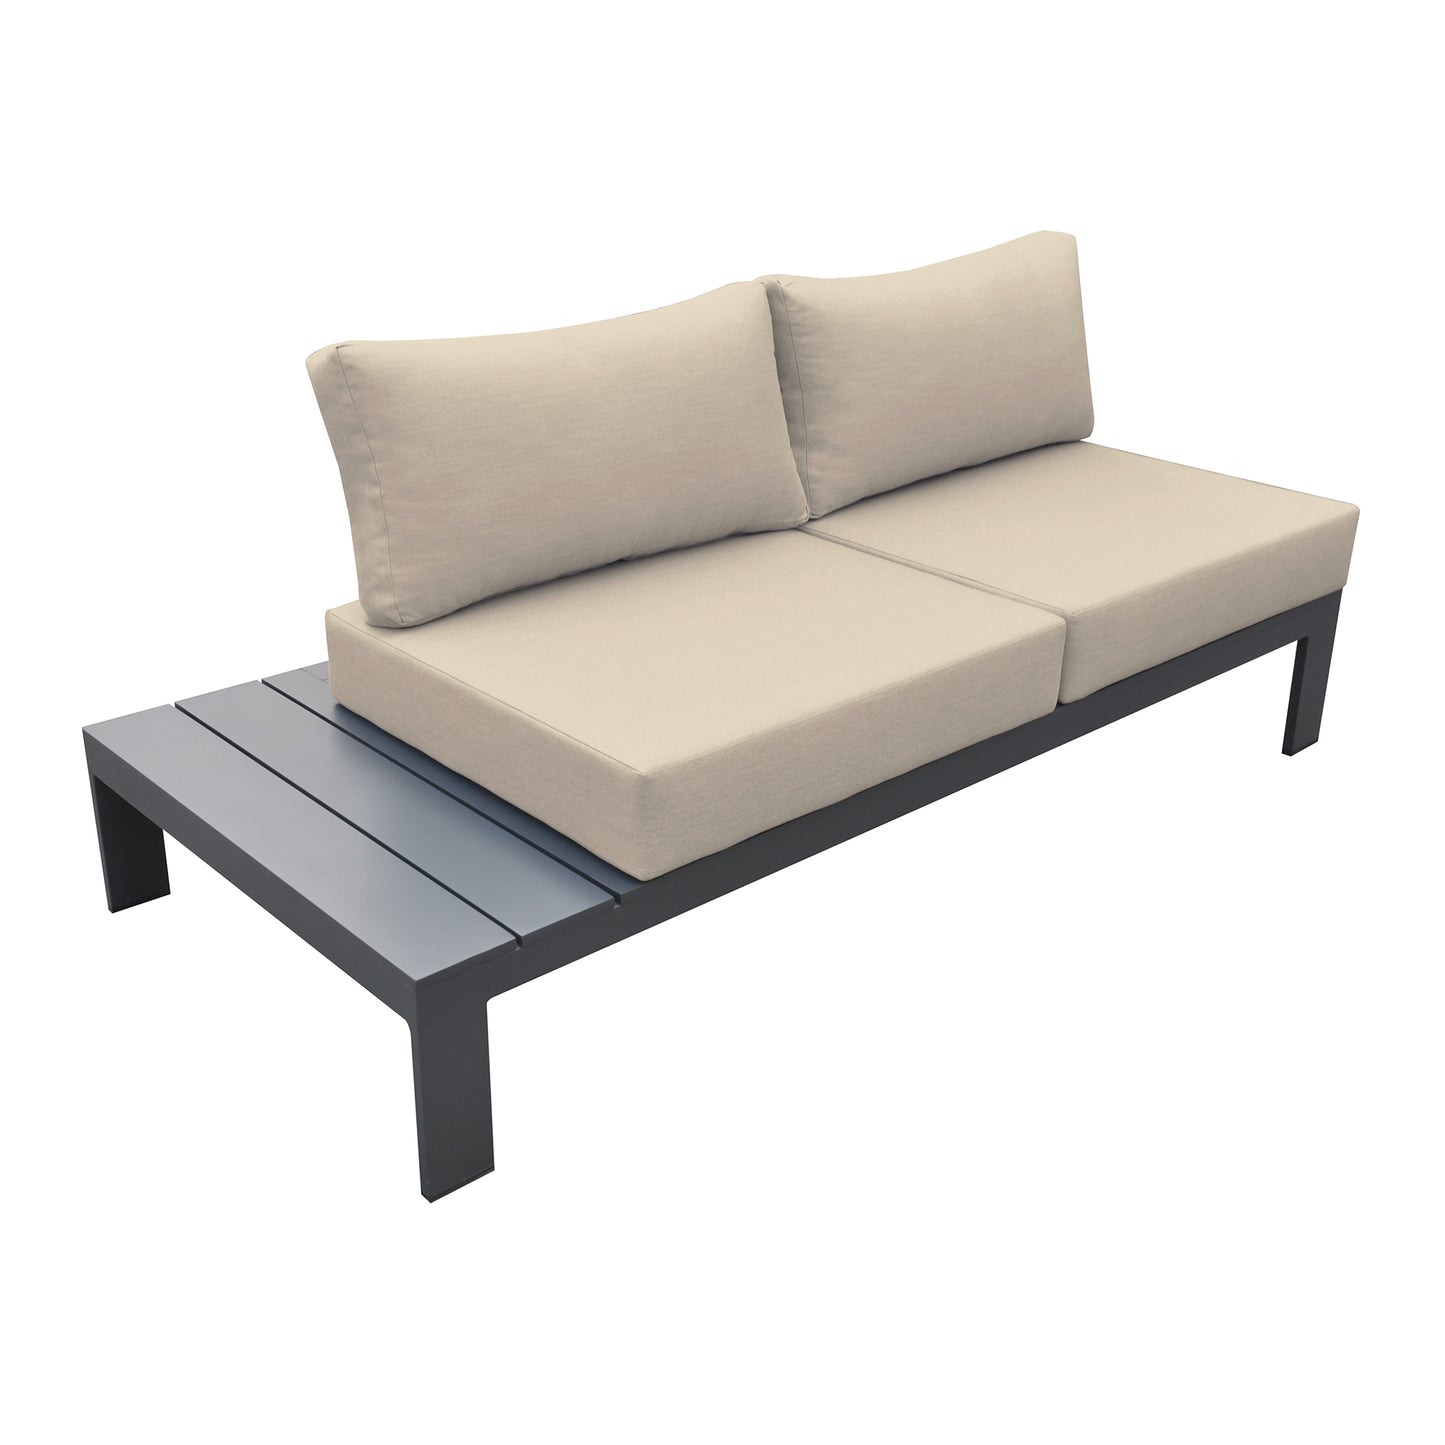 Razor Outdoor 4 piece Sectional set in Dark Gray Finish and Taupe Cushions